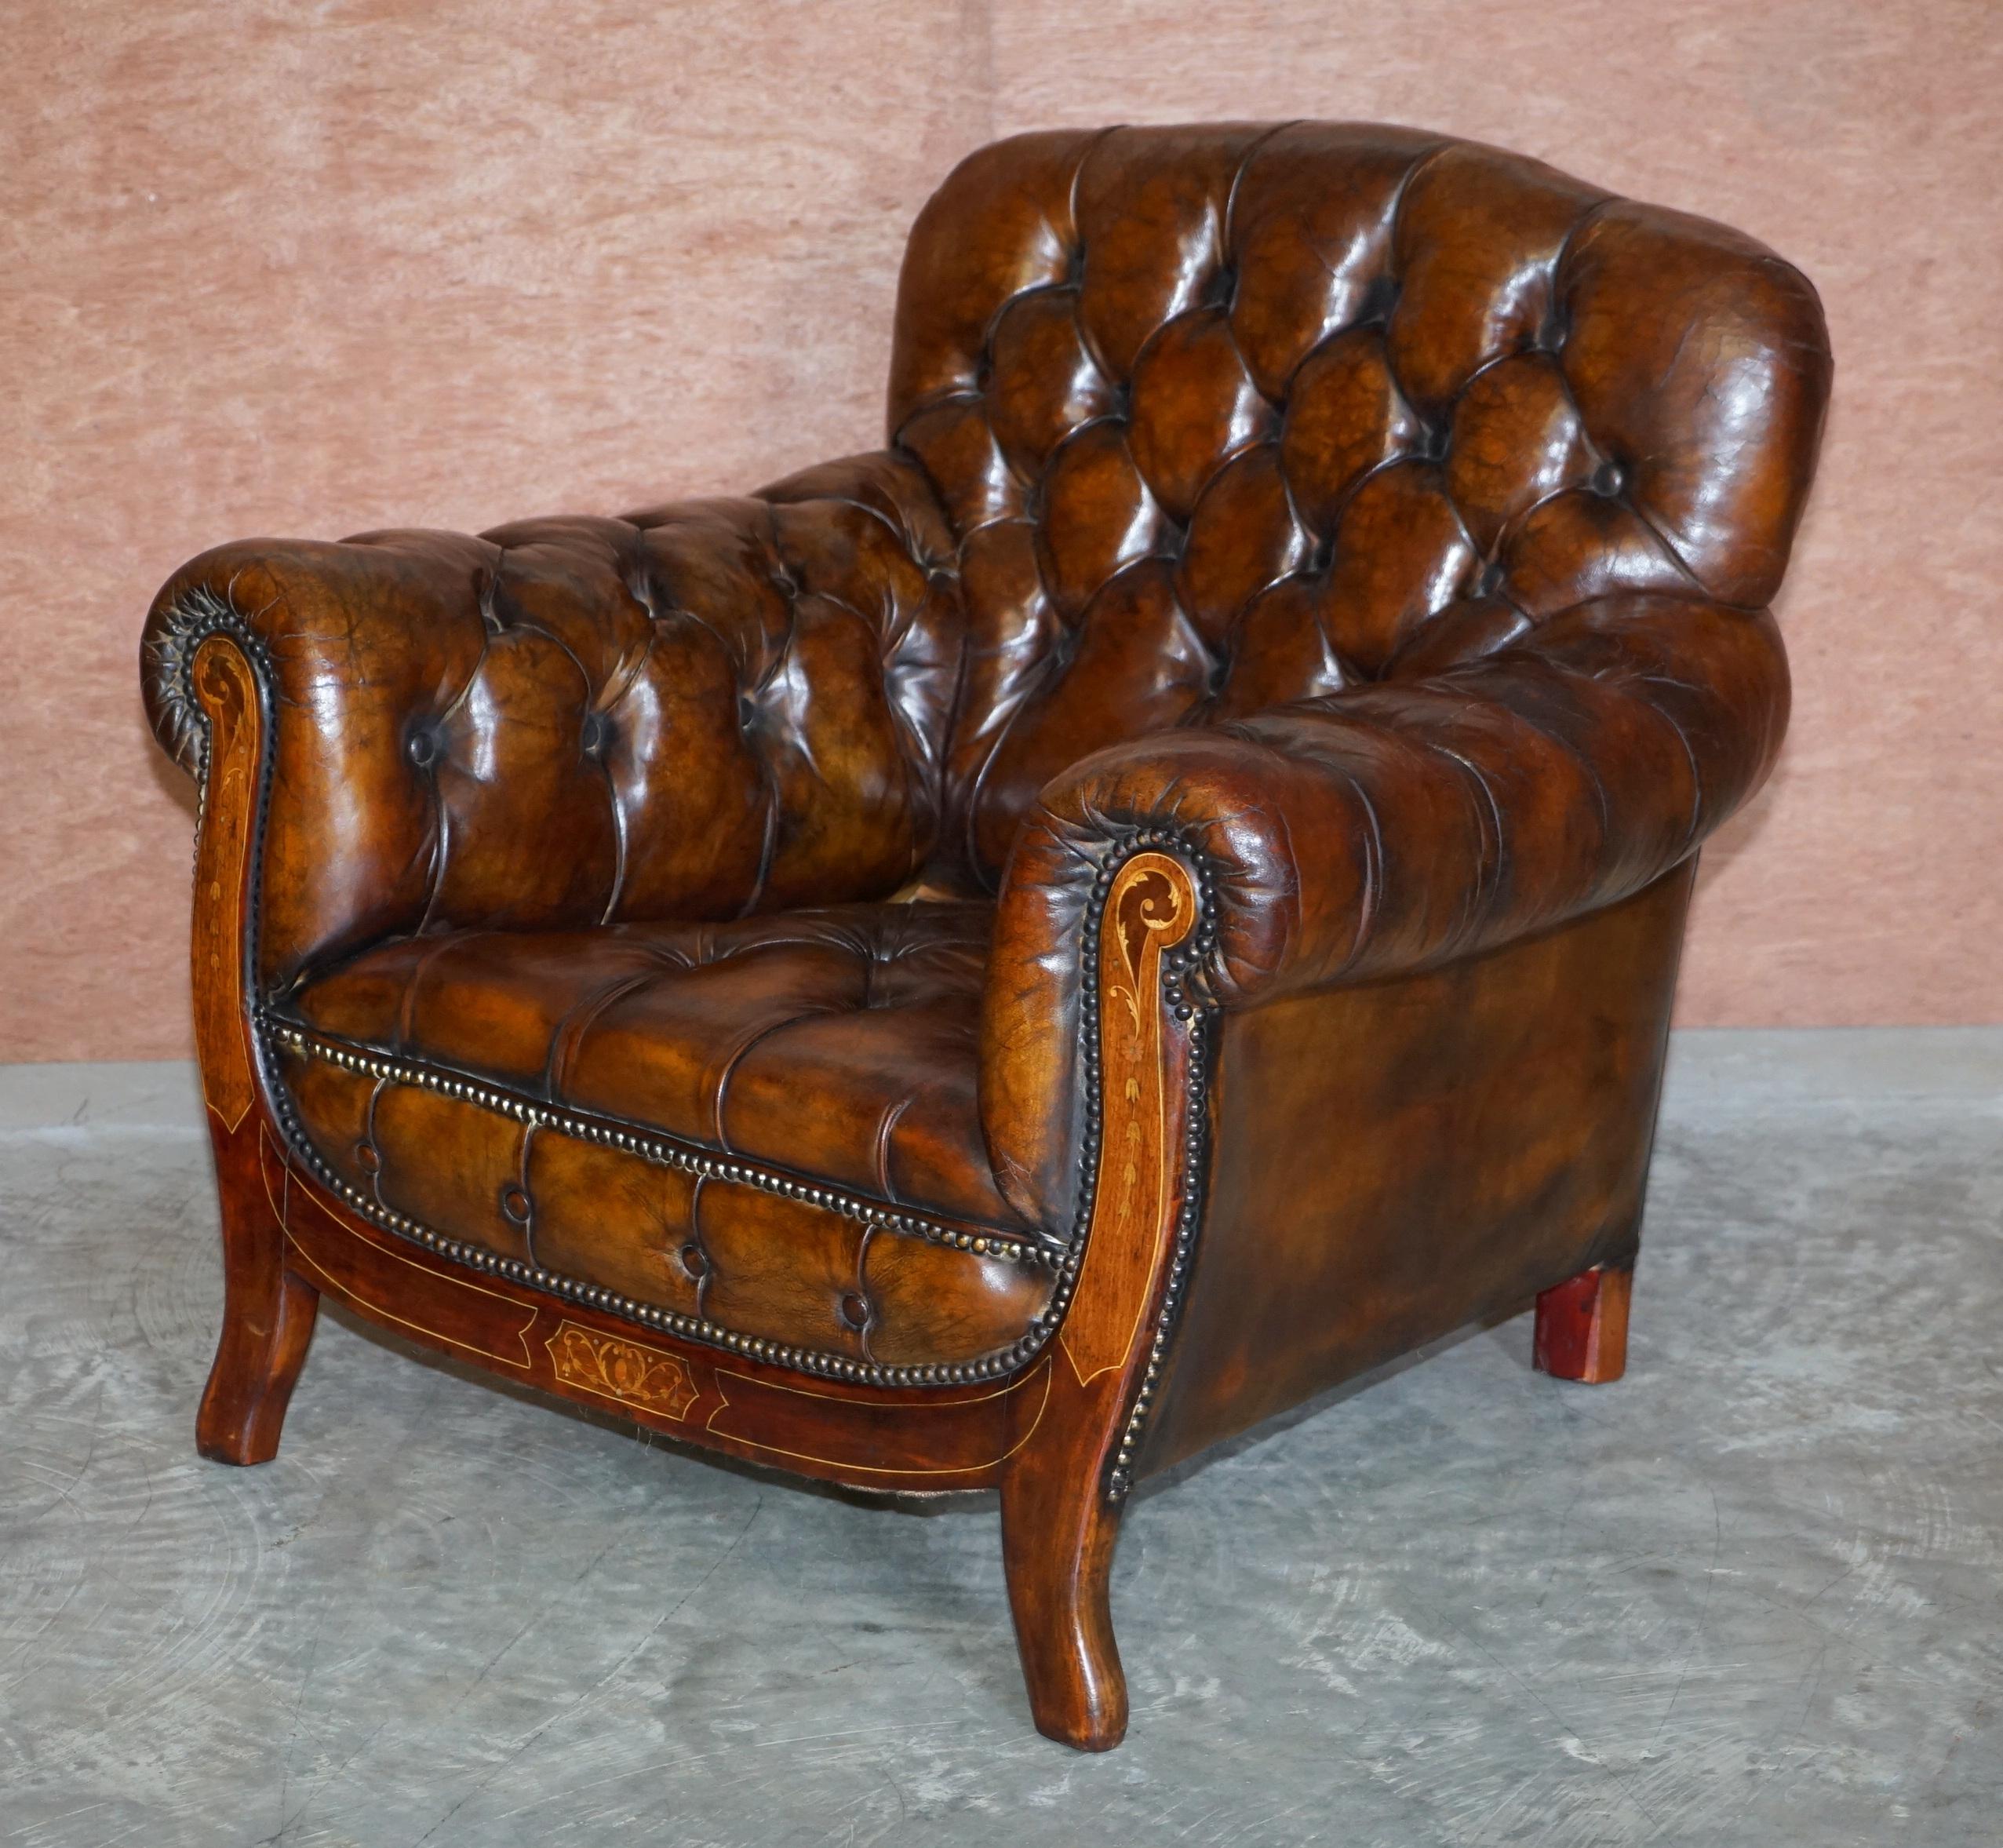 English Restored Antique Art Nouveau Chesterfield Brown Leather Sofa Armchairs Suite